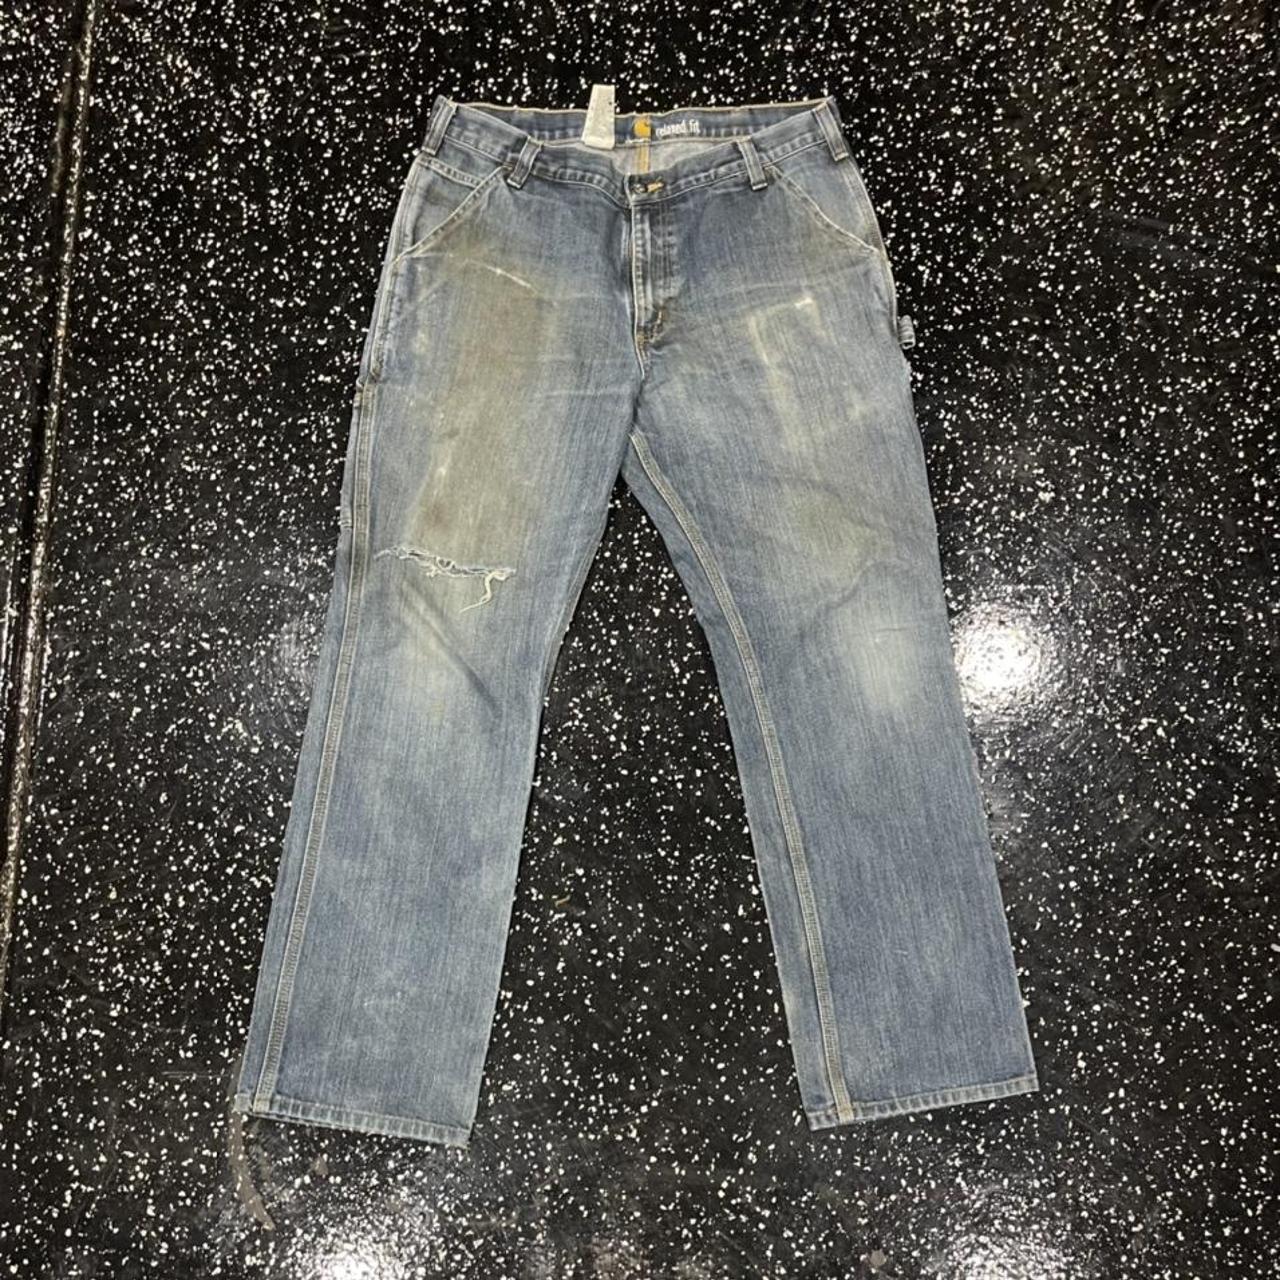 Product Image 3 - Carhartt carpenters jeans
Nice fade and